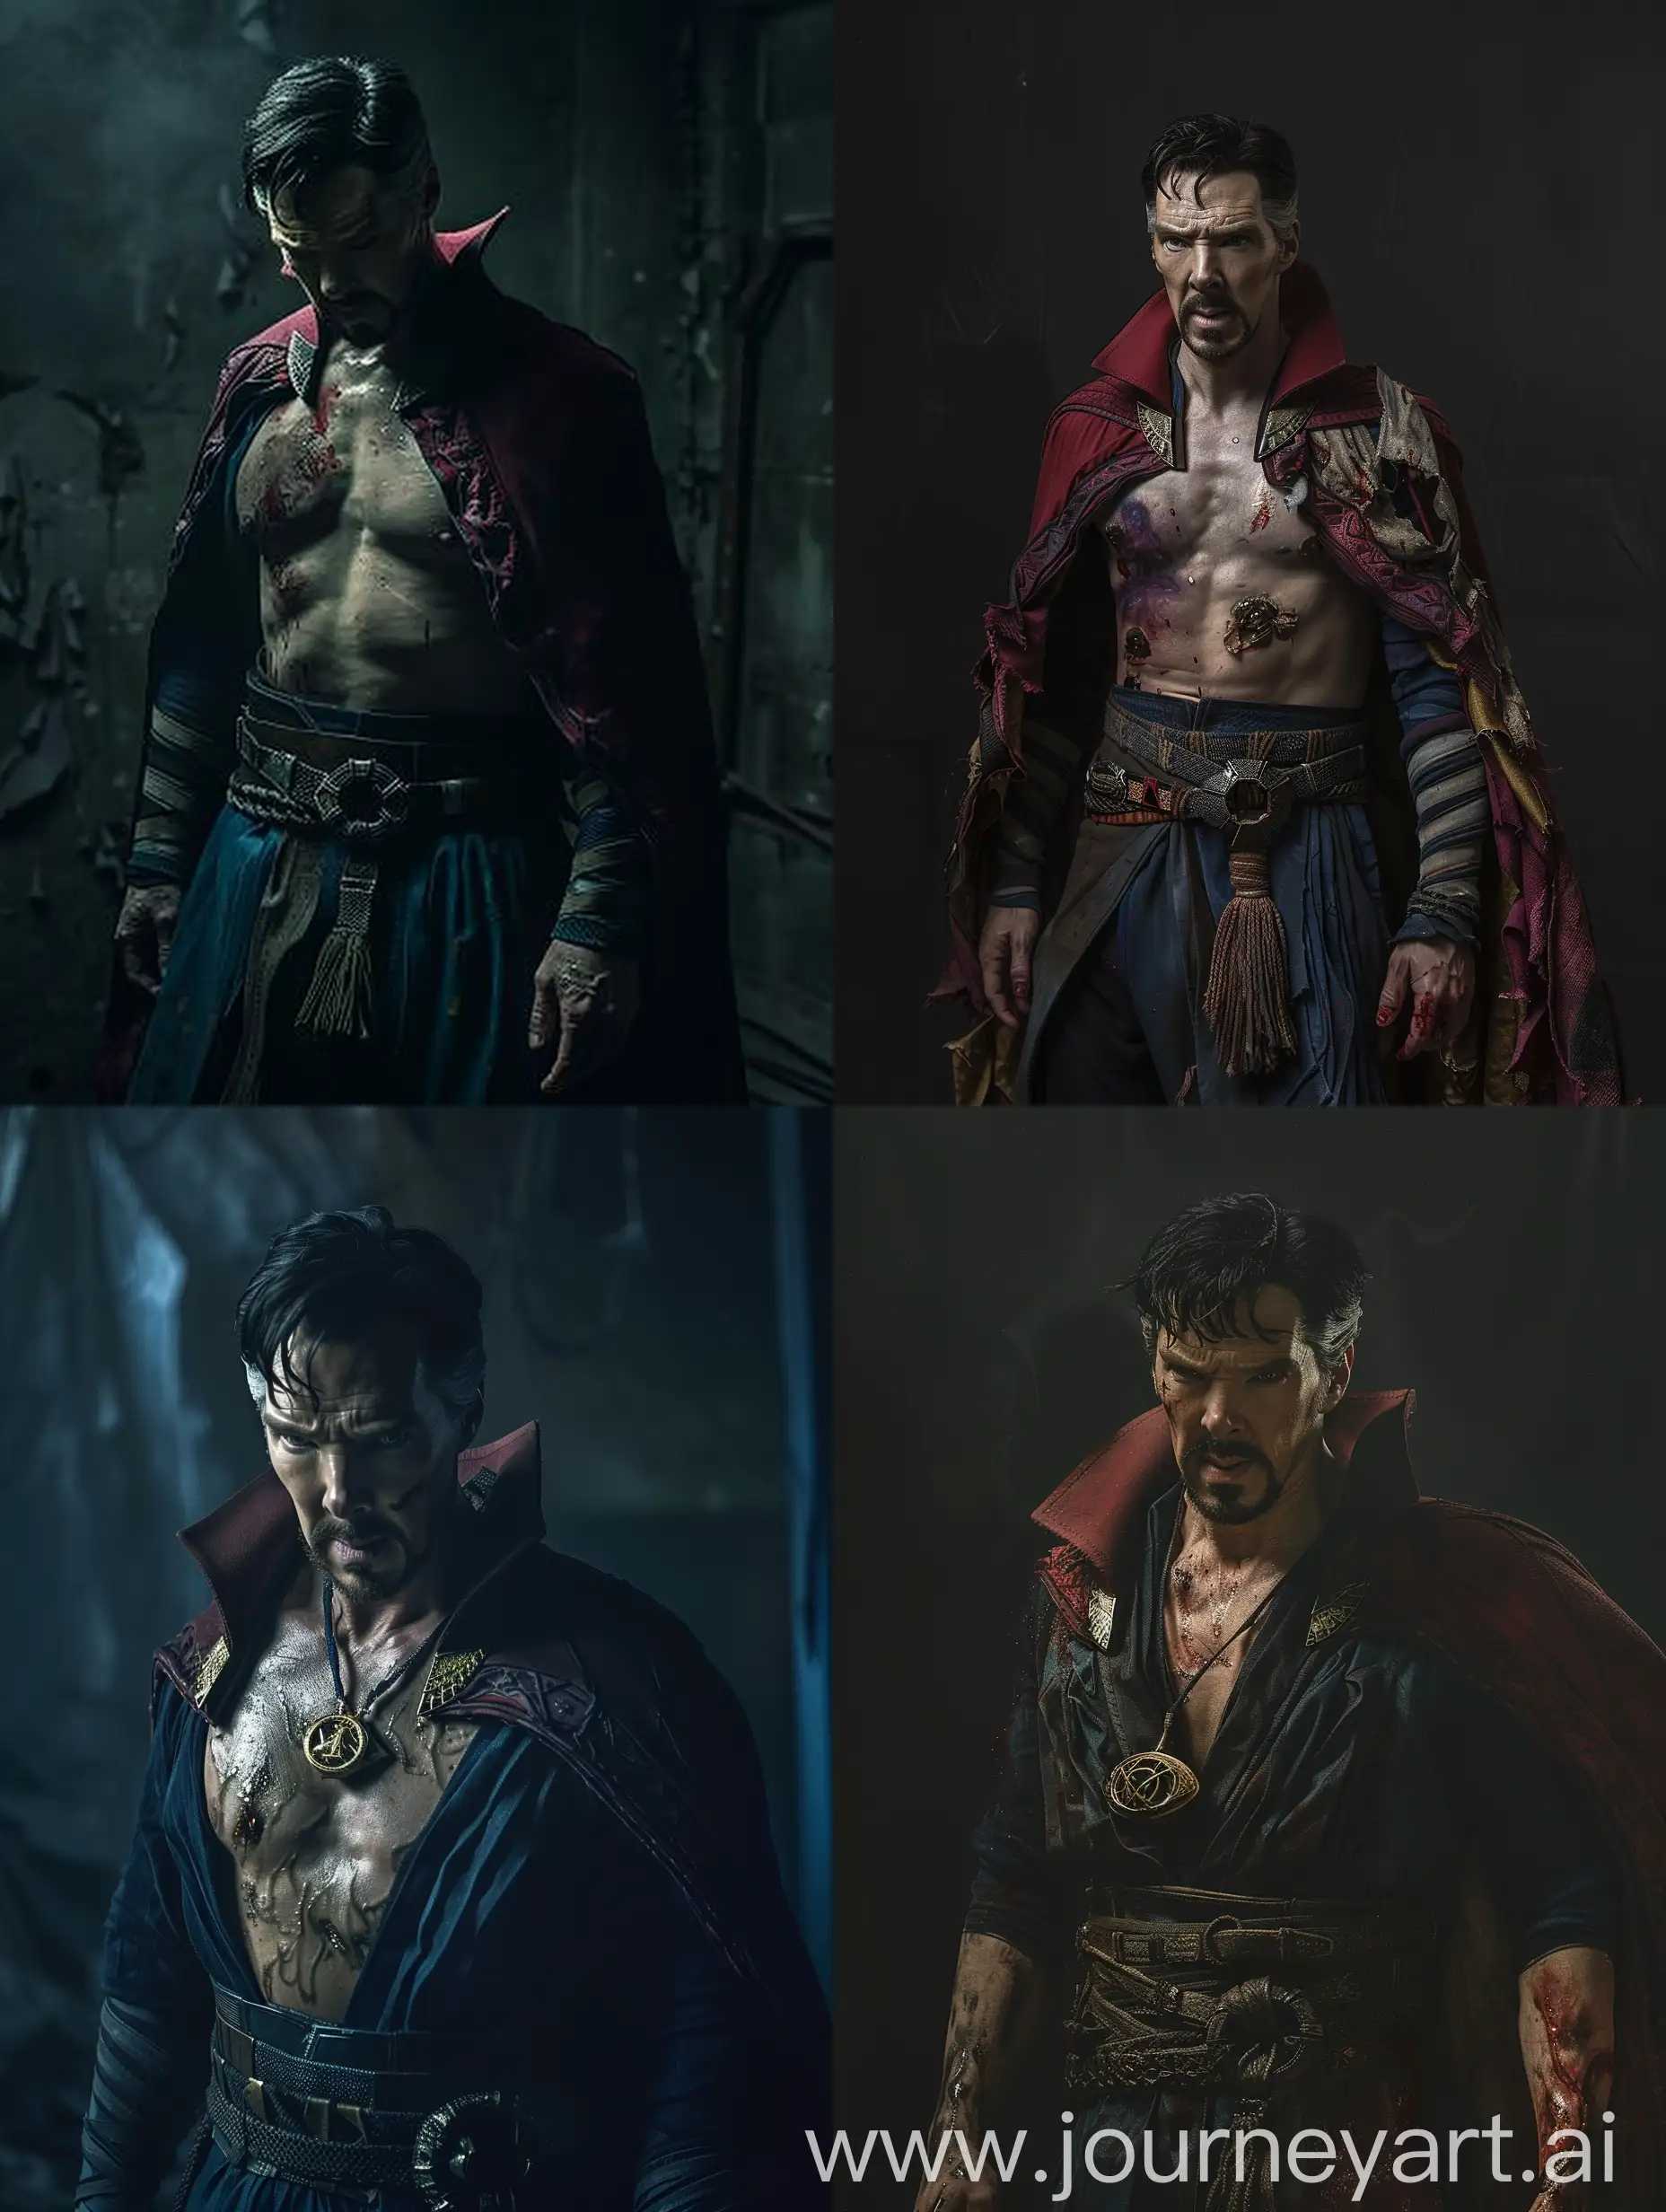 Doctor Strange in ripped, torn, ragged outfit, shirtless, in a dark room.